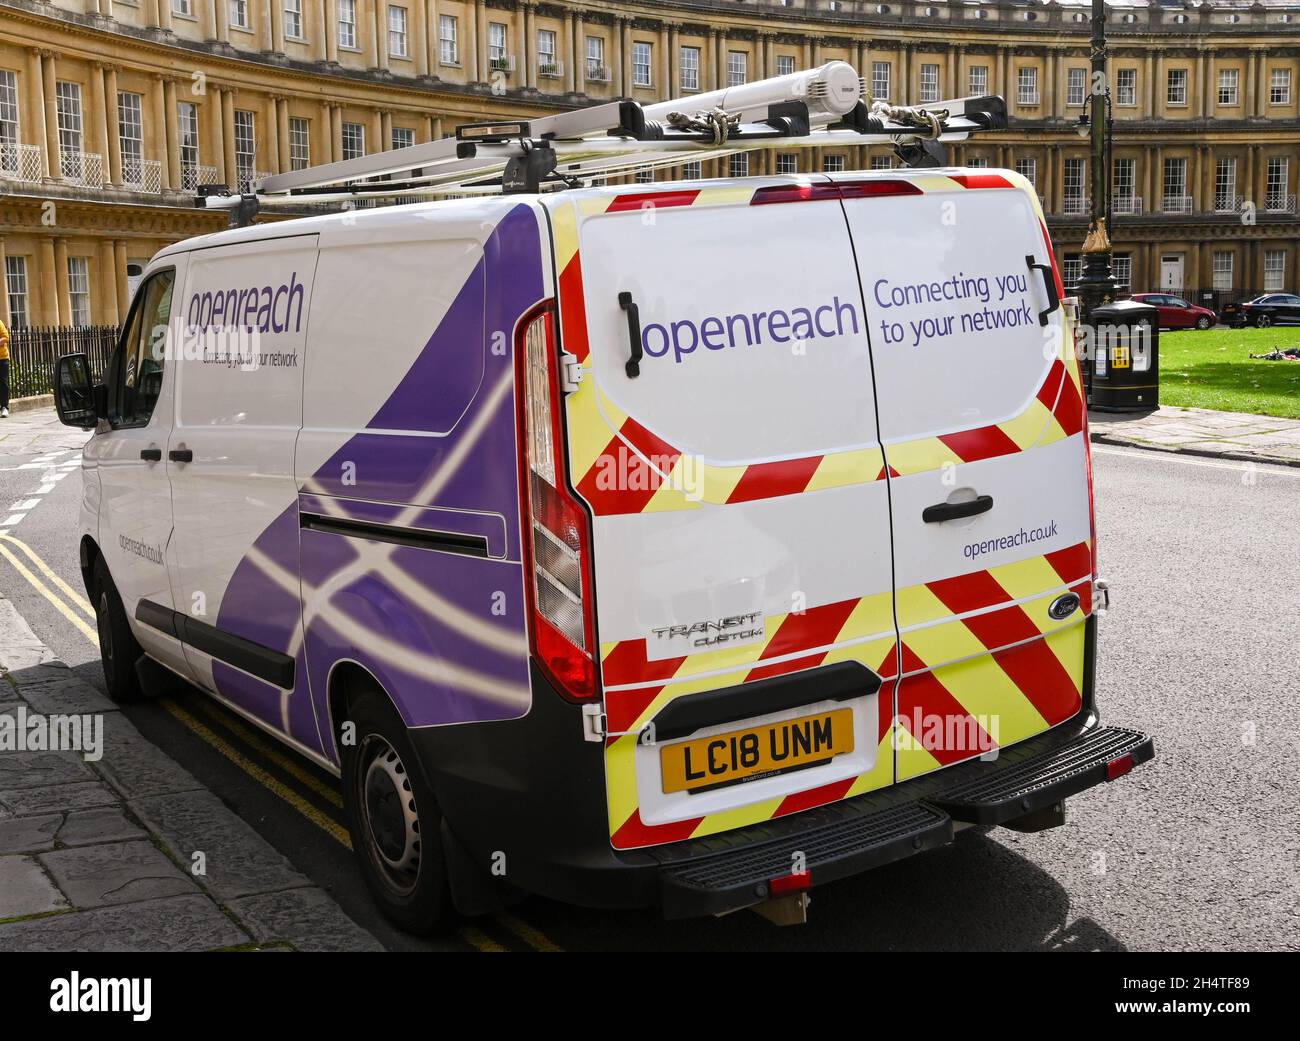 British Telecom Van High Resolution Stock Photography and Images - Alamy